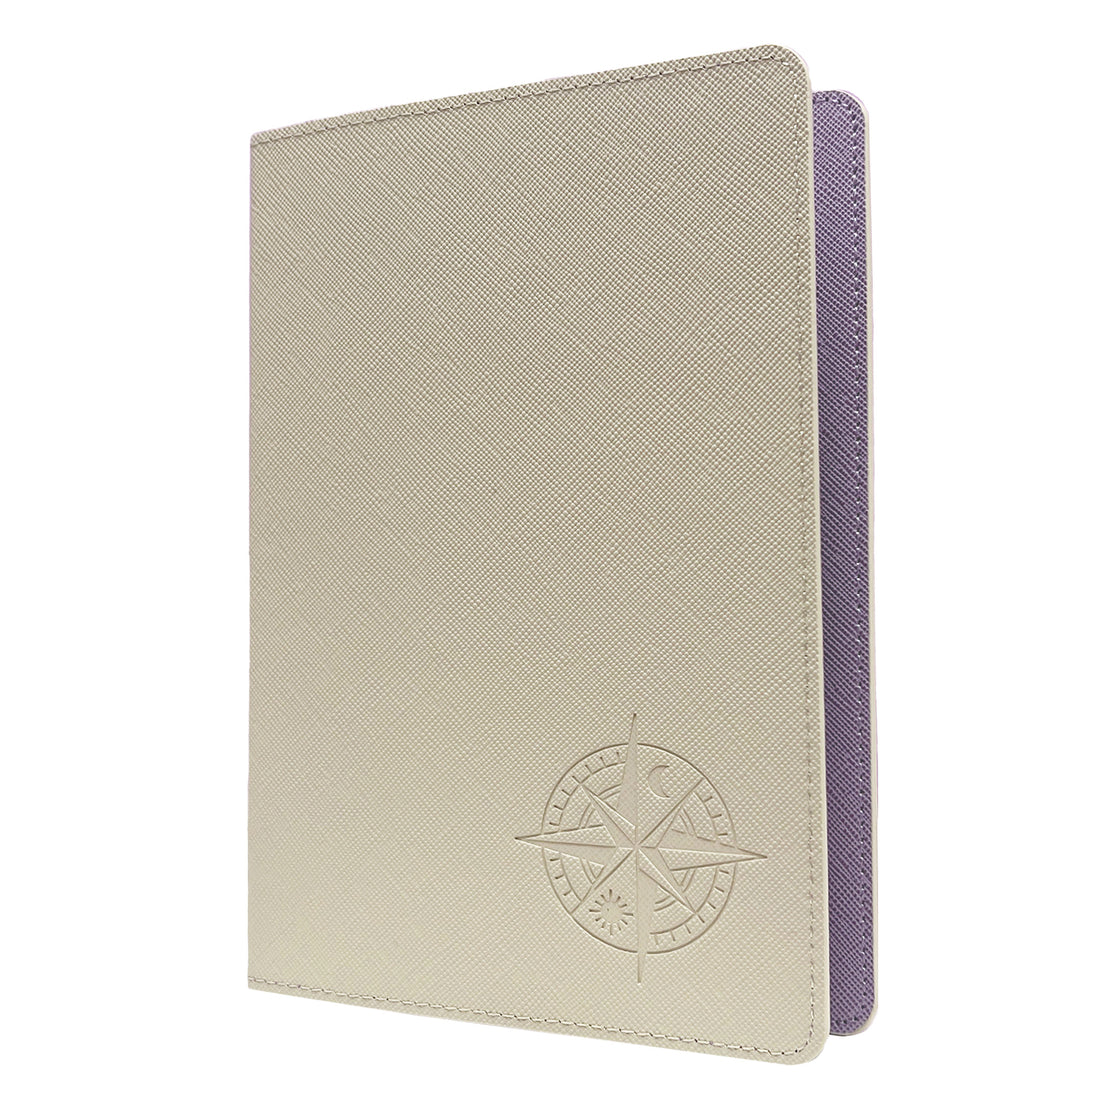 Personal Size DUO Planner【Violet Vanilla】